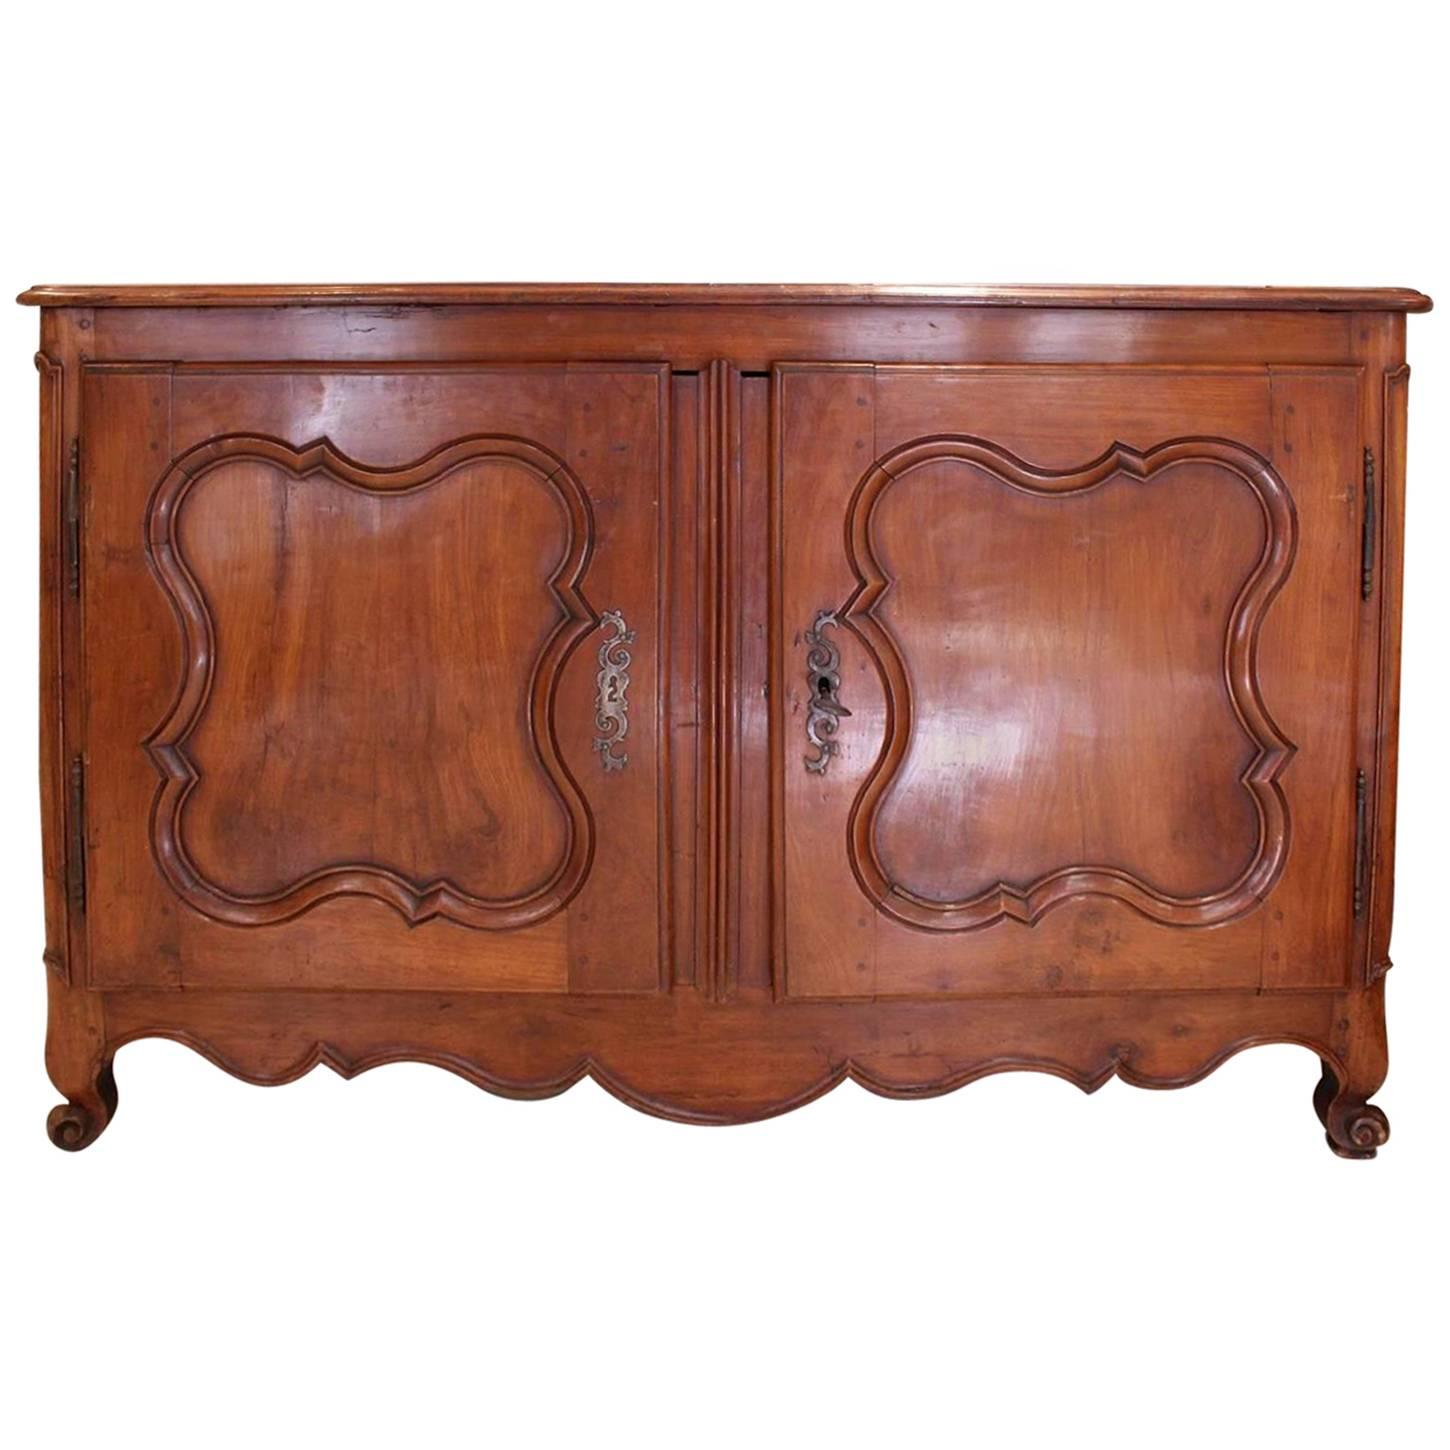 Antique French 18th Century Period Regence Walnut Buffet For Sale